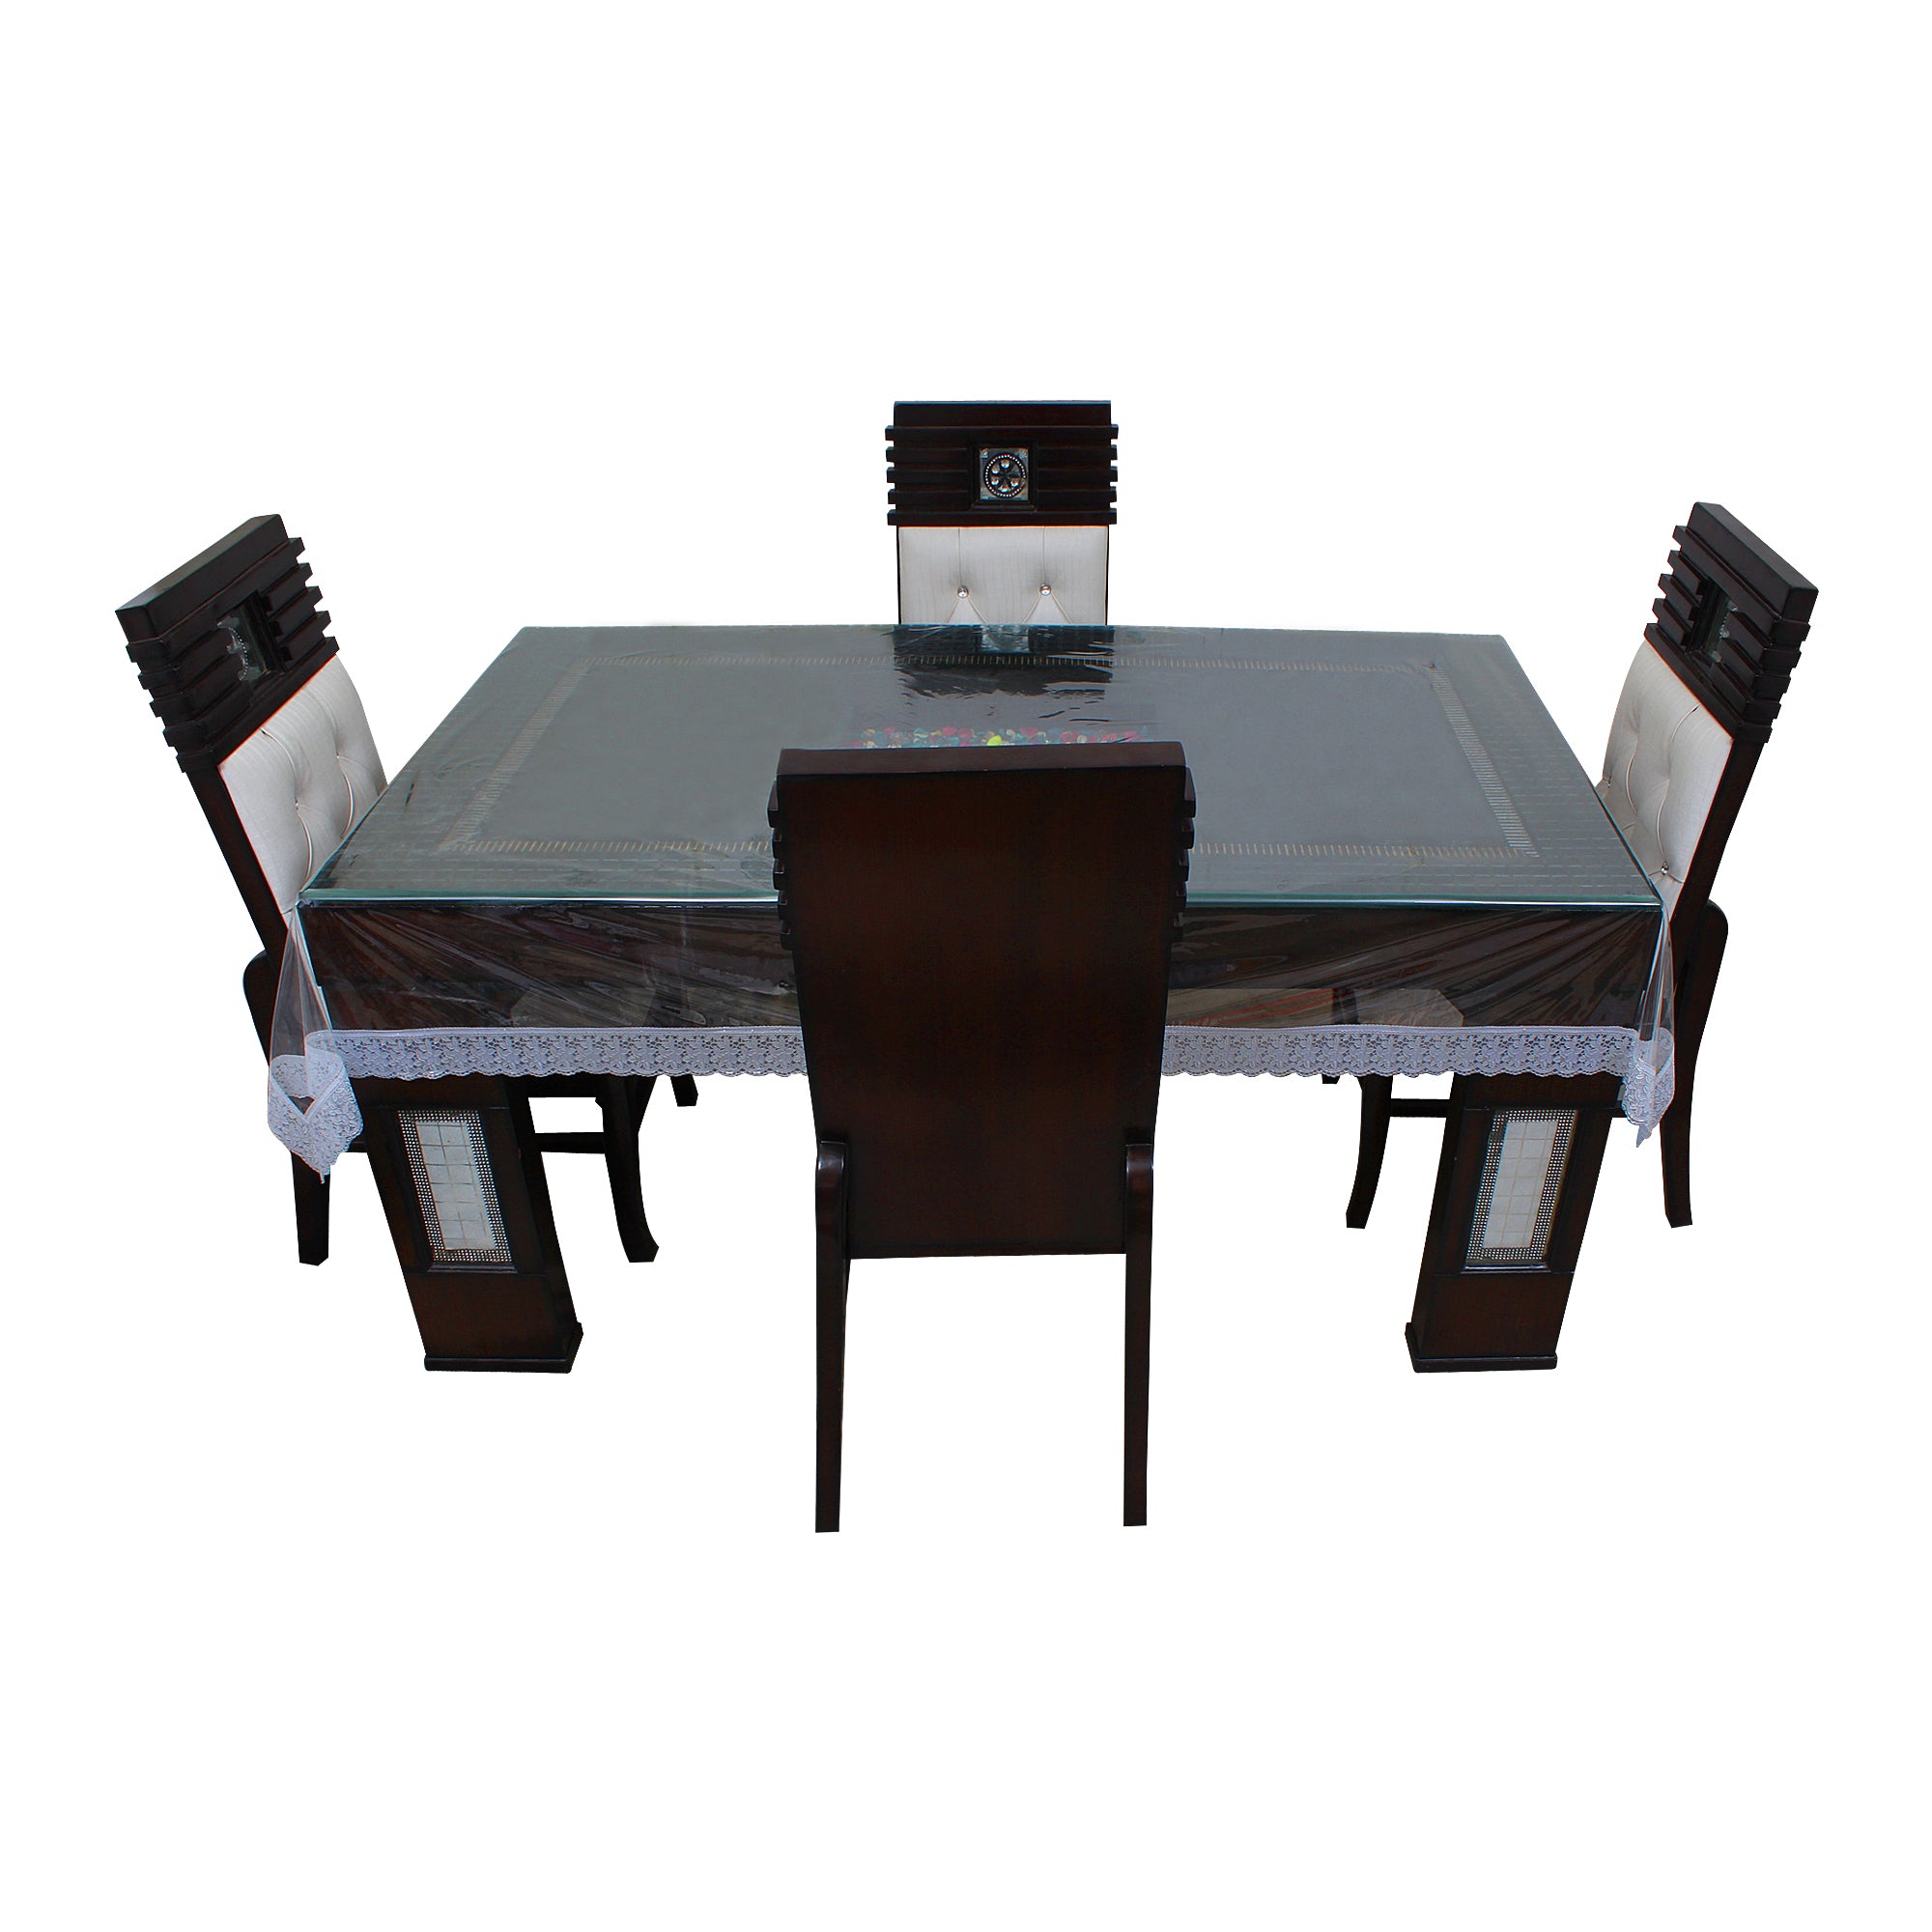 Waterproof and Dustproof Dining Table Cover, Silver - Dream Care Furnishings Private Limited